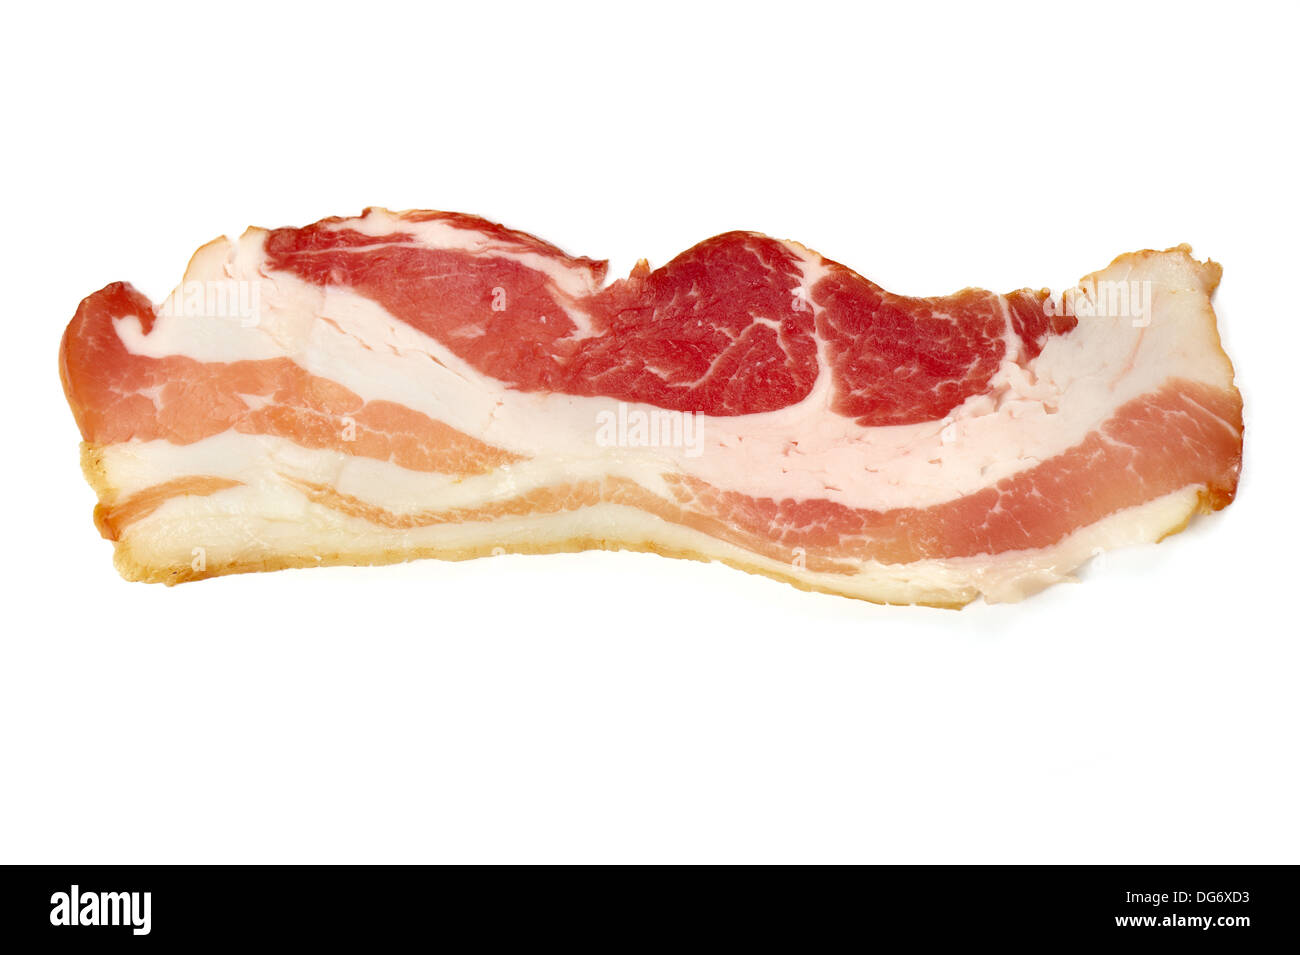 One strip of bacon isolated on a white background. Tasty looking but unhealthy food. Stock Photo